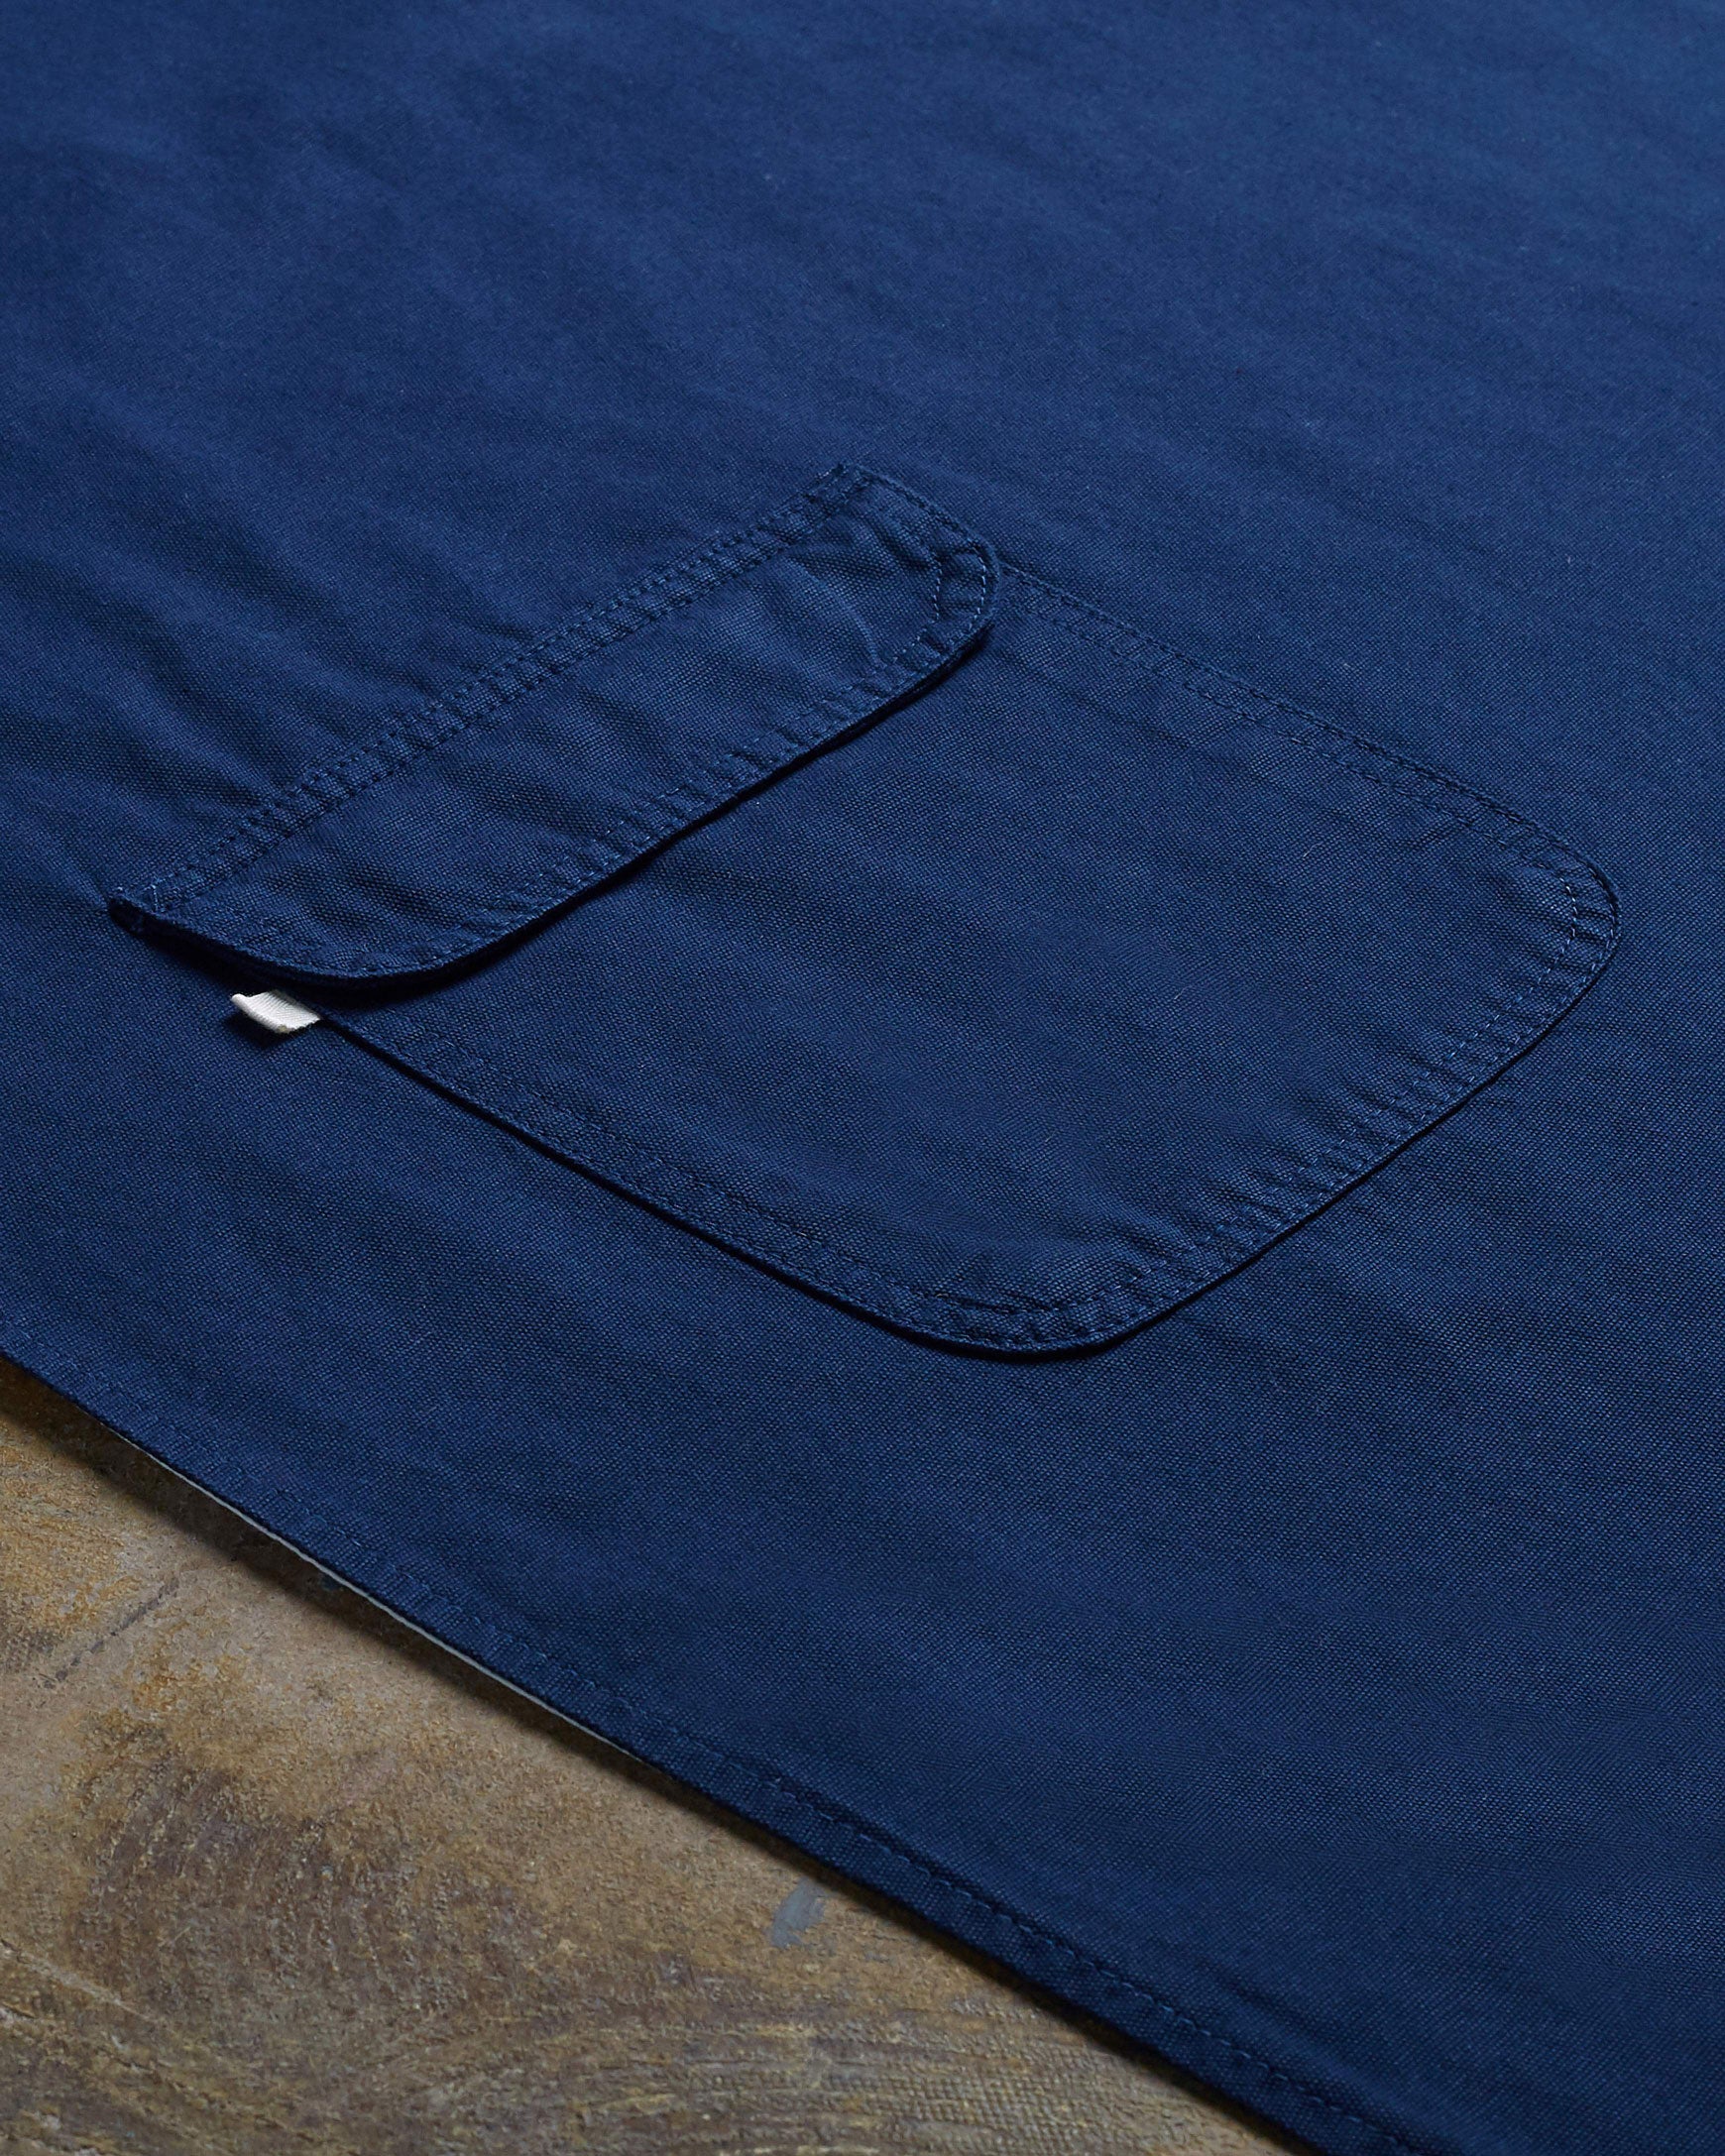 Angled flat view of navy-blue #9001 work apron by Uskees. Showing hip pocket and clearer view of organic cotton fabric texture.